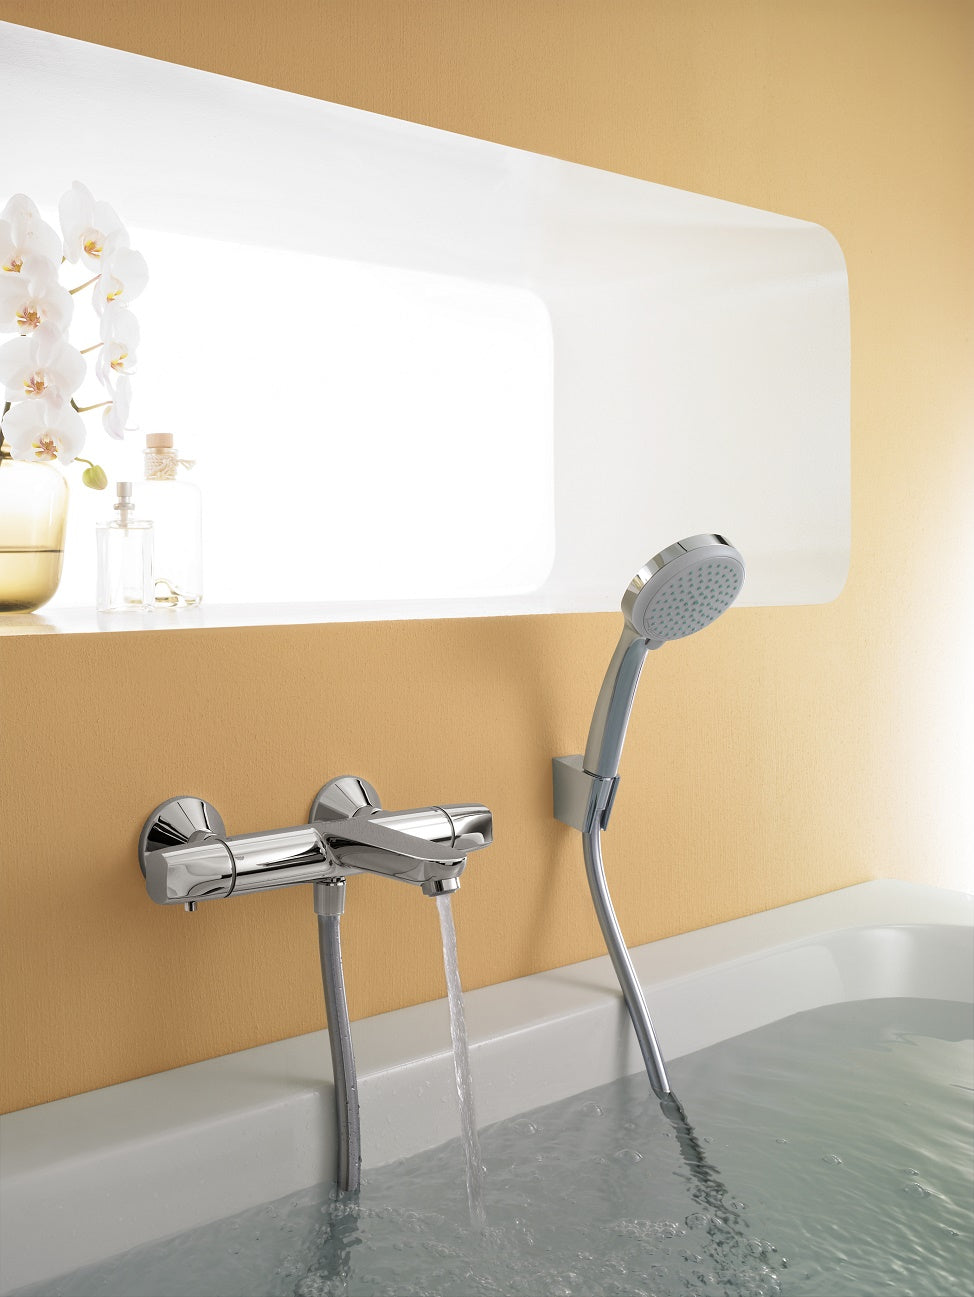 Croma 100 Vario Shower Set - Premium Showers from Hansgrohe - Just GHS281! Shop now at Kimo in Ghana